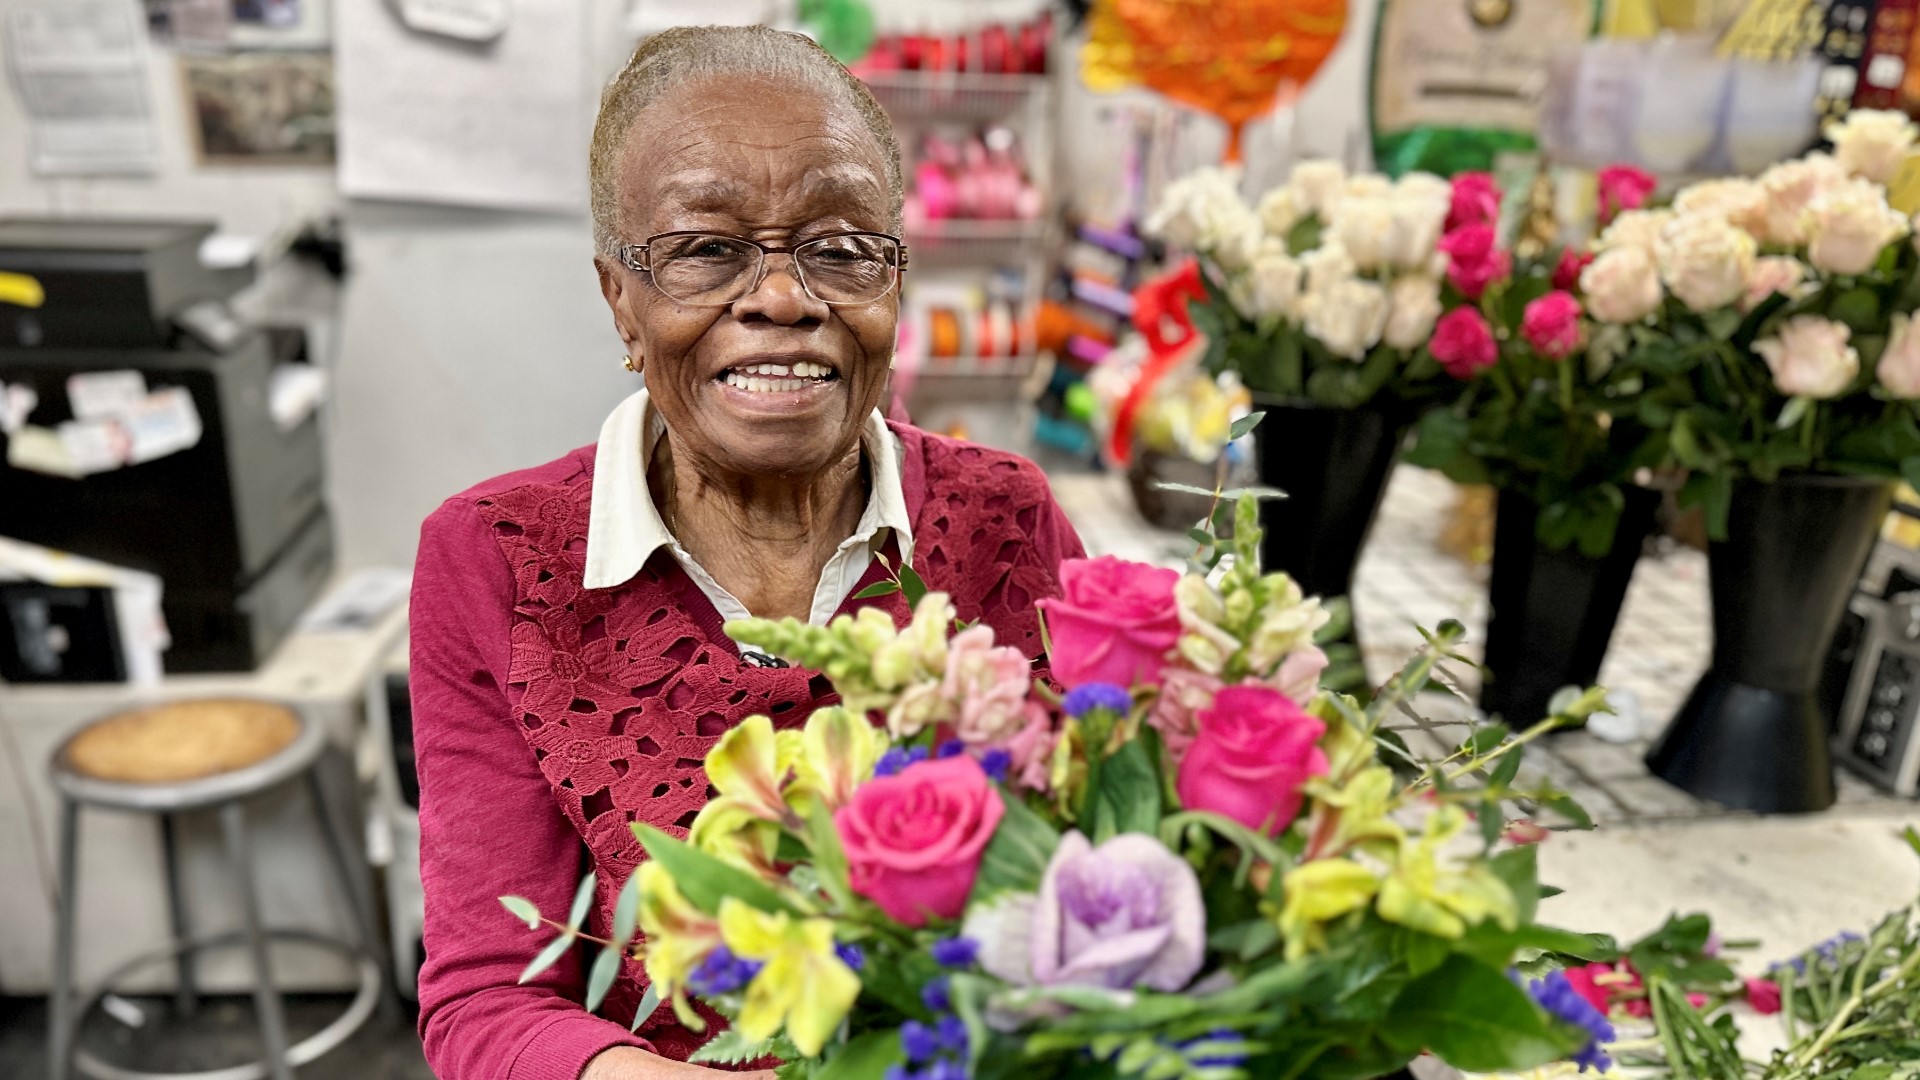 Mary Wesley opened Flowers Just-4-U in 1984, the first black-owned floral shop in the Central District. #k5evening